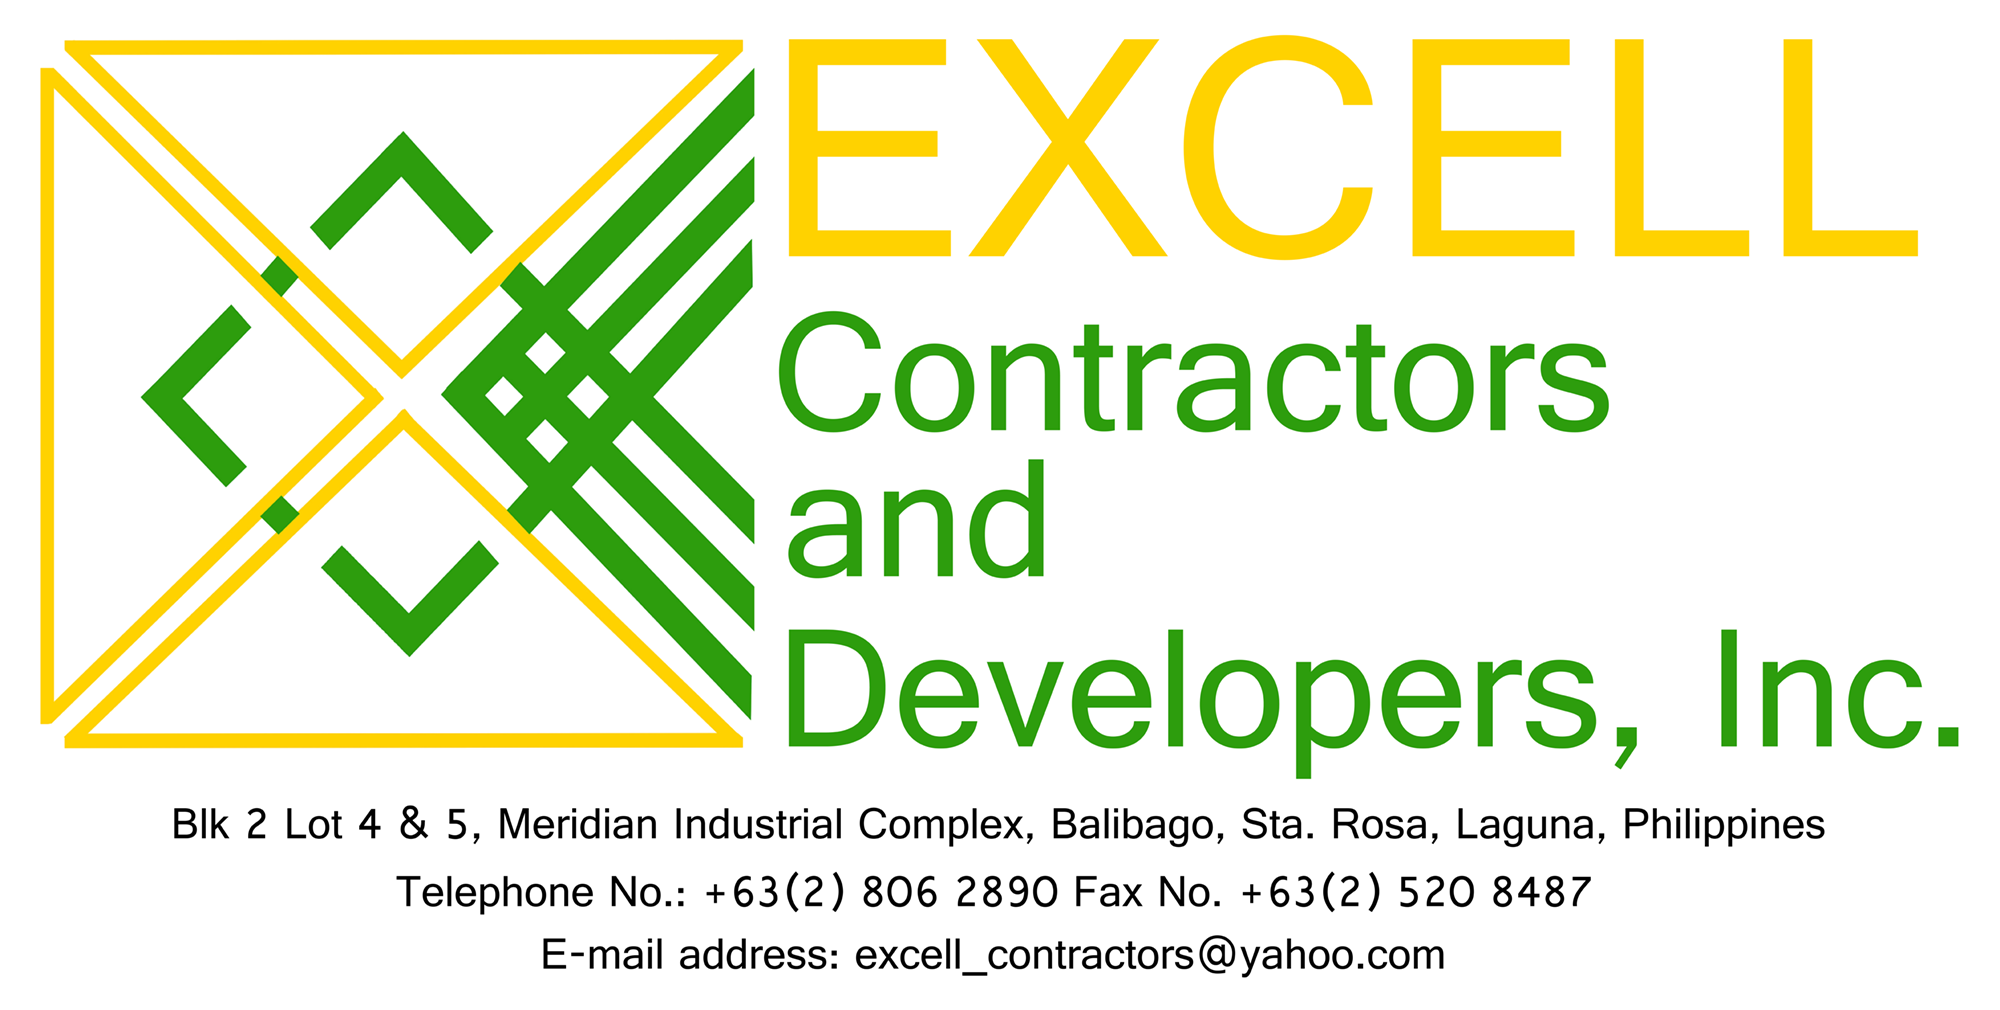 Excell Contractors and Developers, Inc.